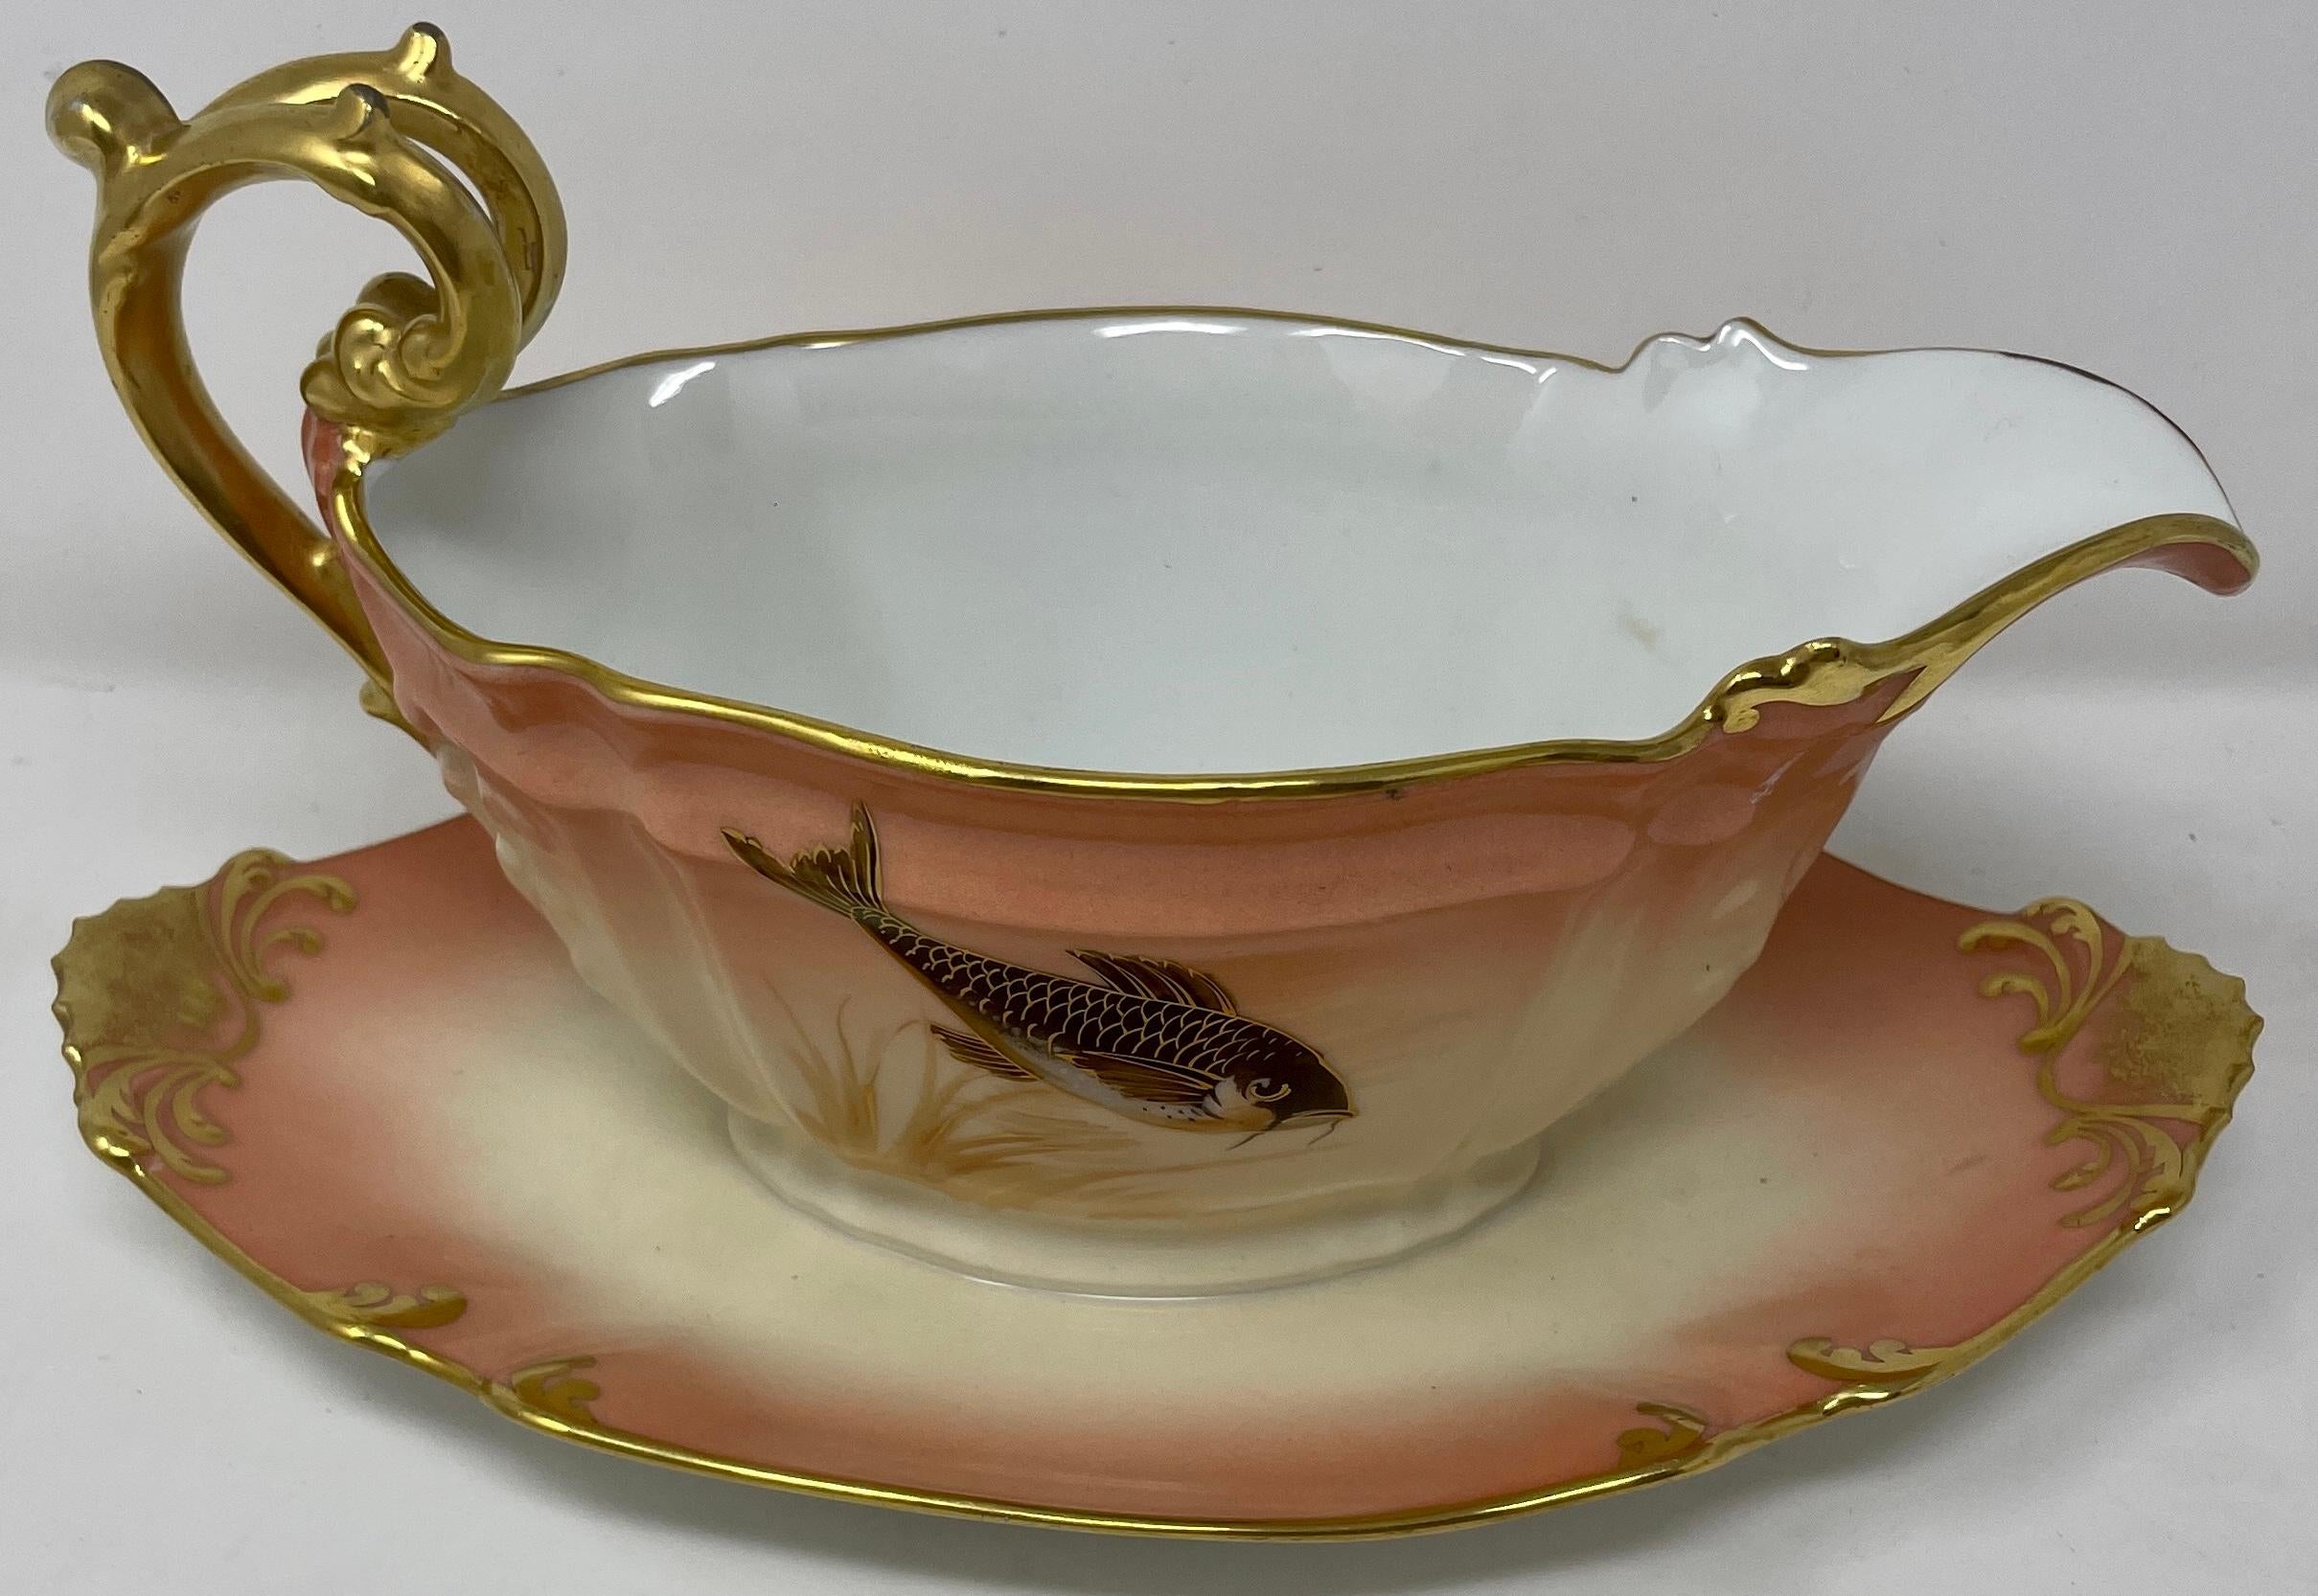 Set of 14 Antique French Hand-Painted Limoges Porcelain Fish Service, Circa 1890 For Sale 2